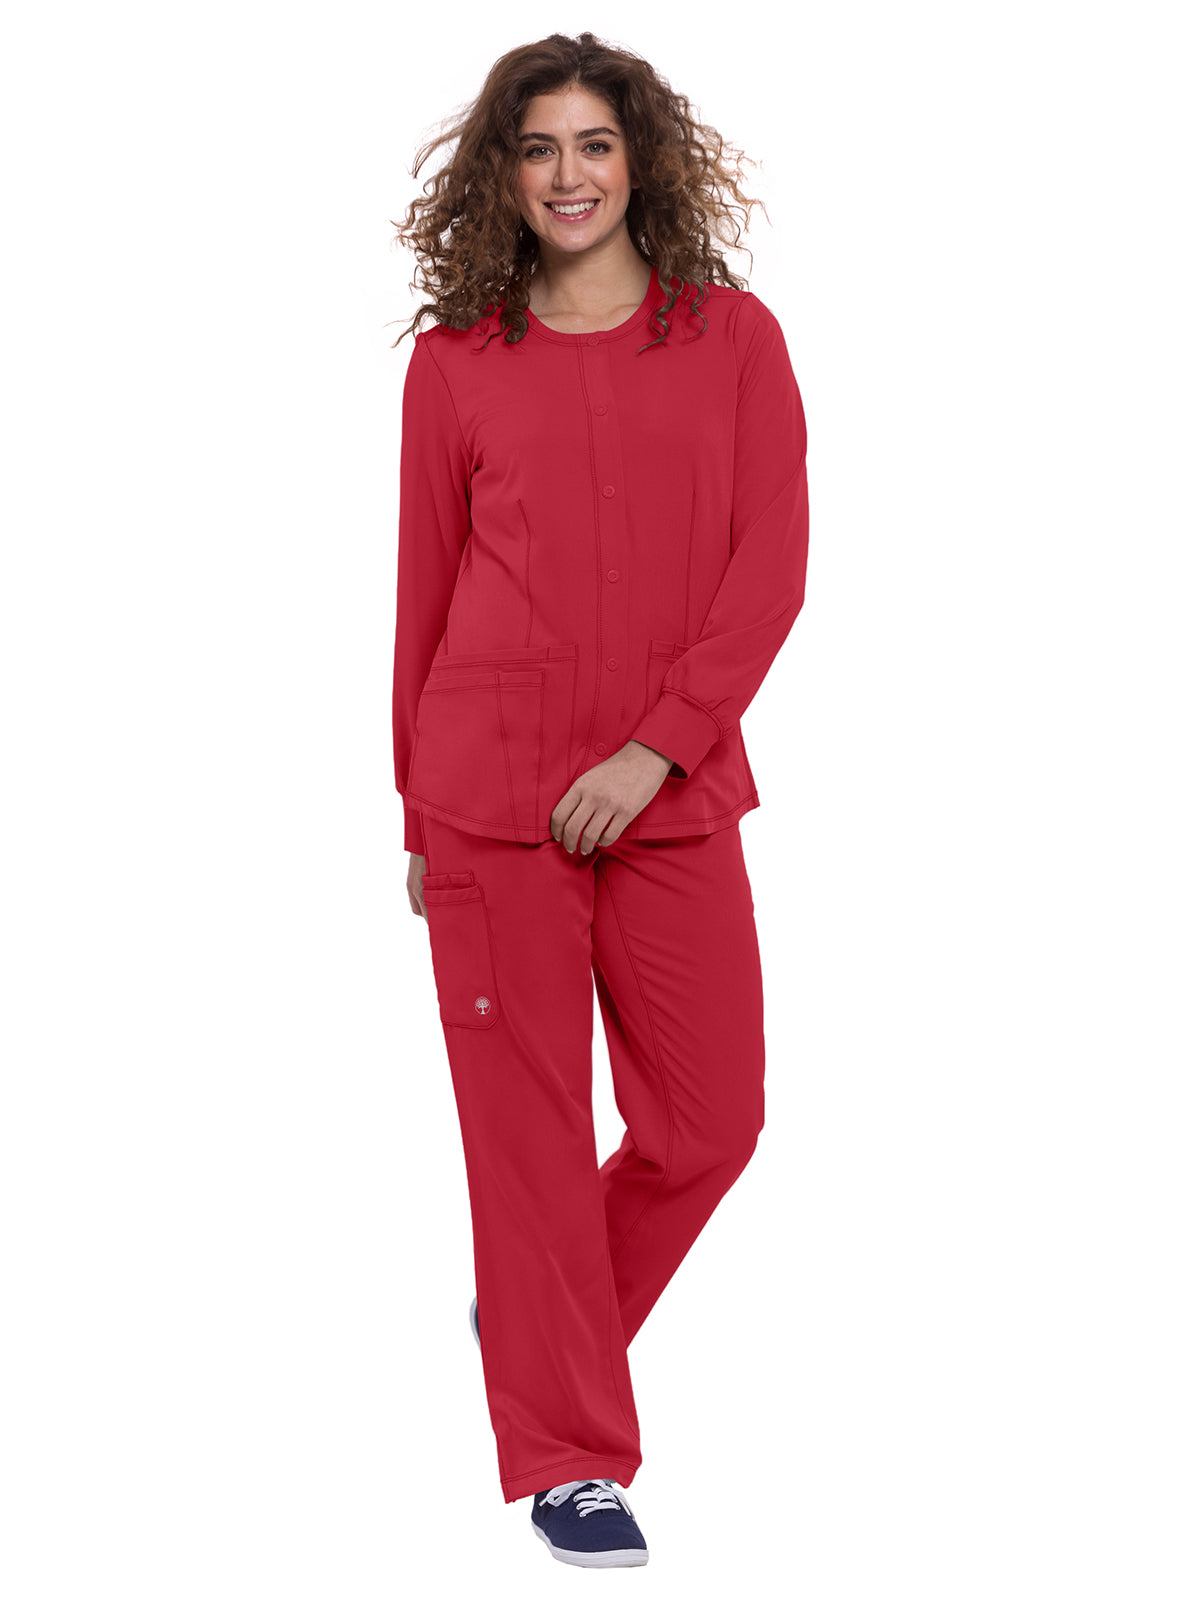 Women's Snap Front Scrub Jacket - 5500 - Red